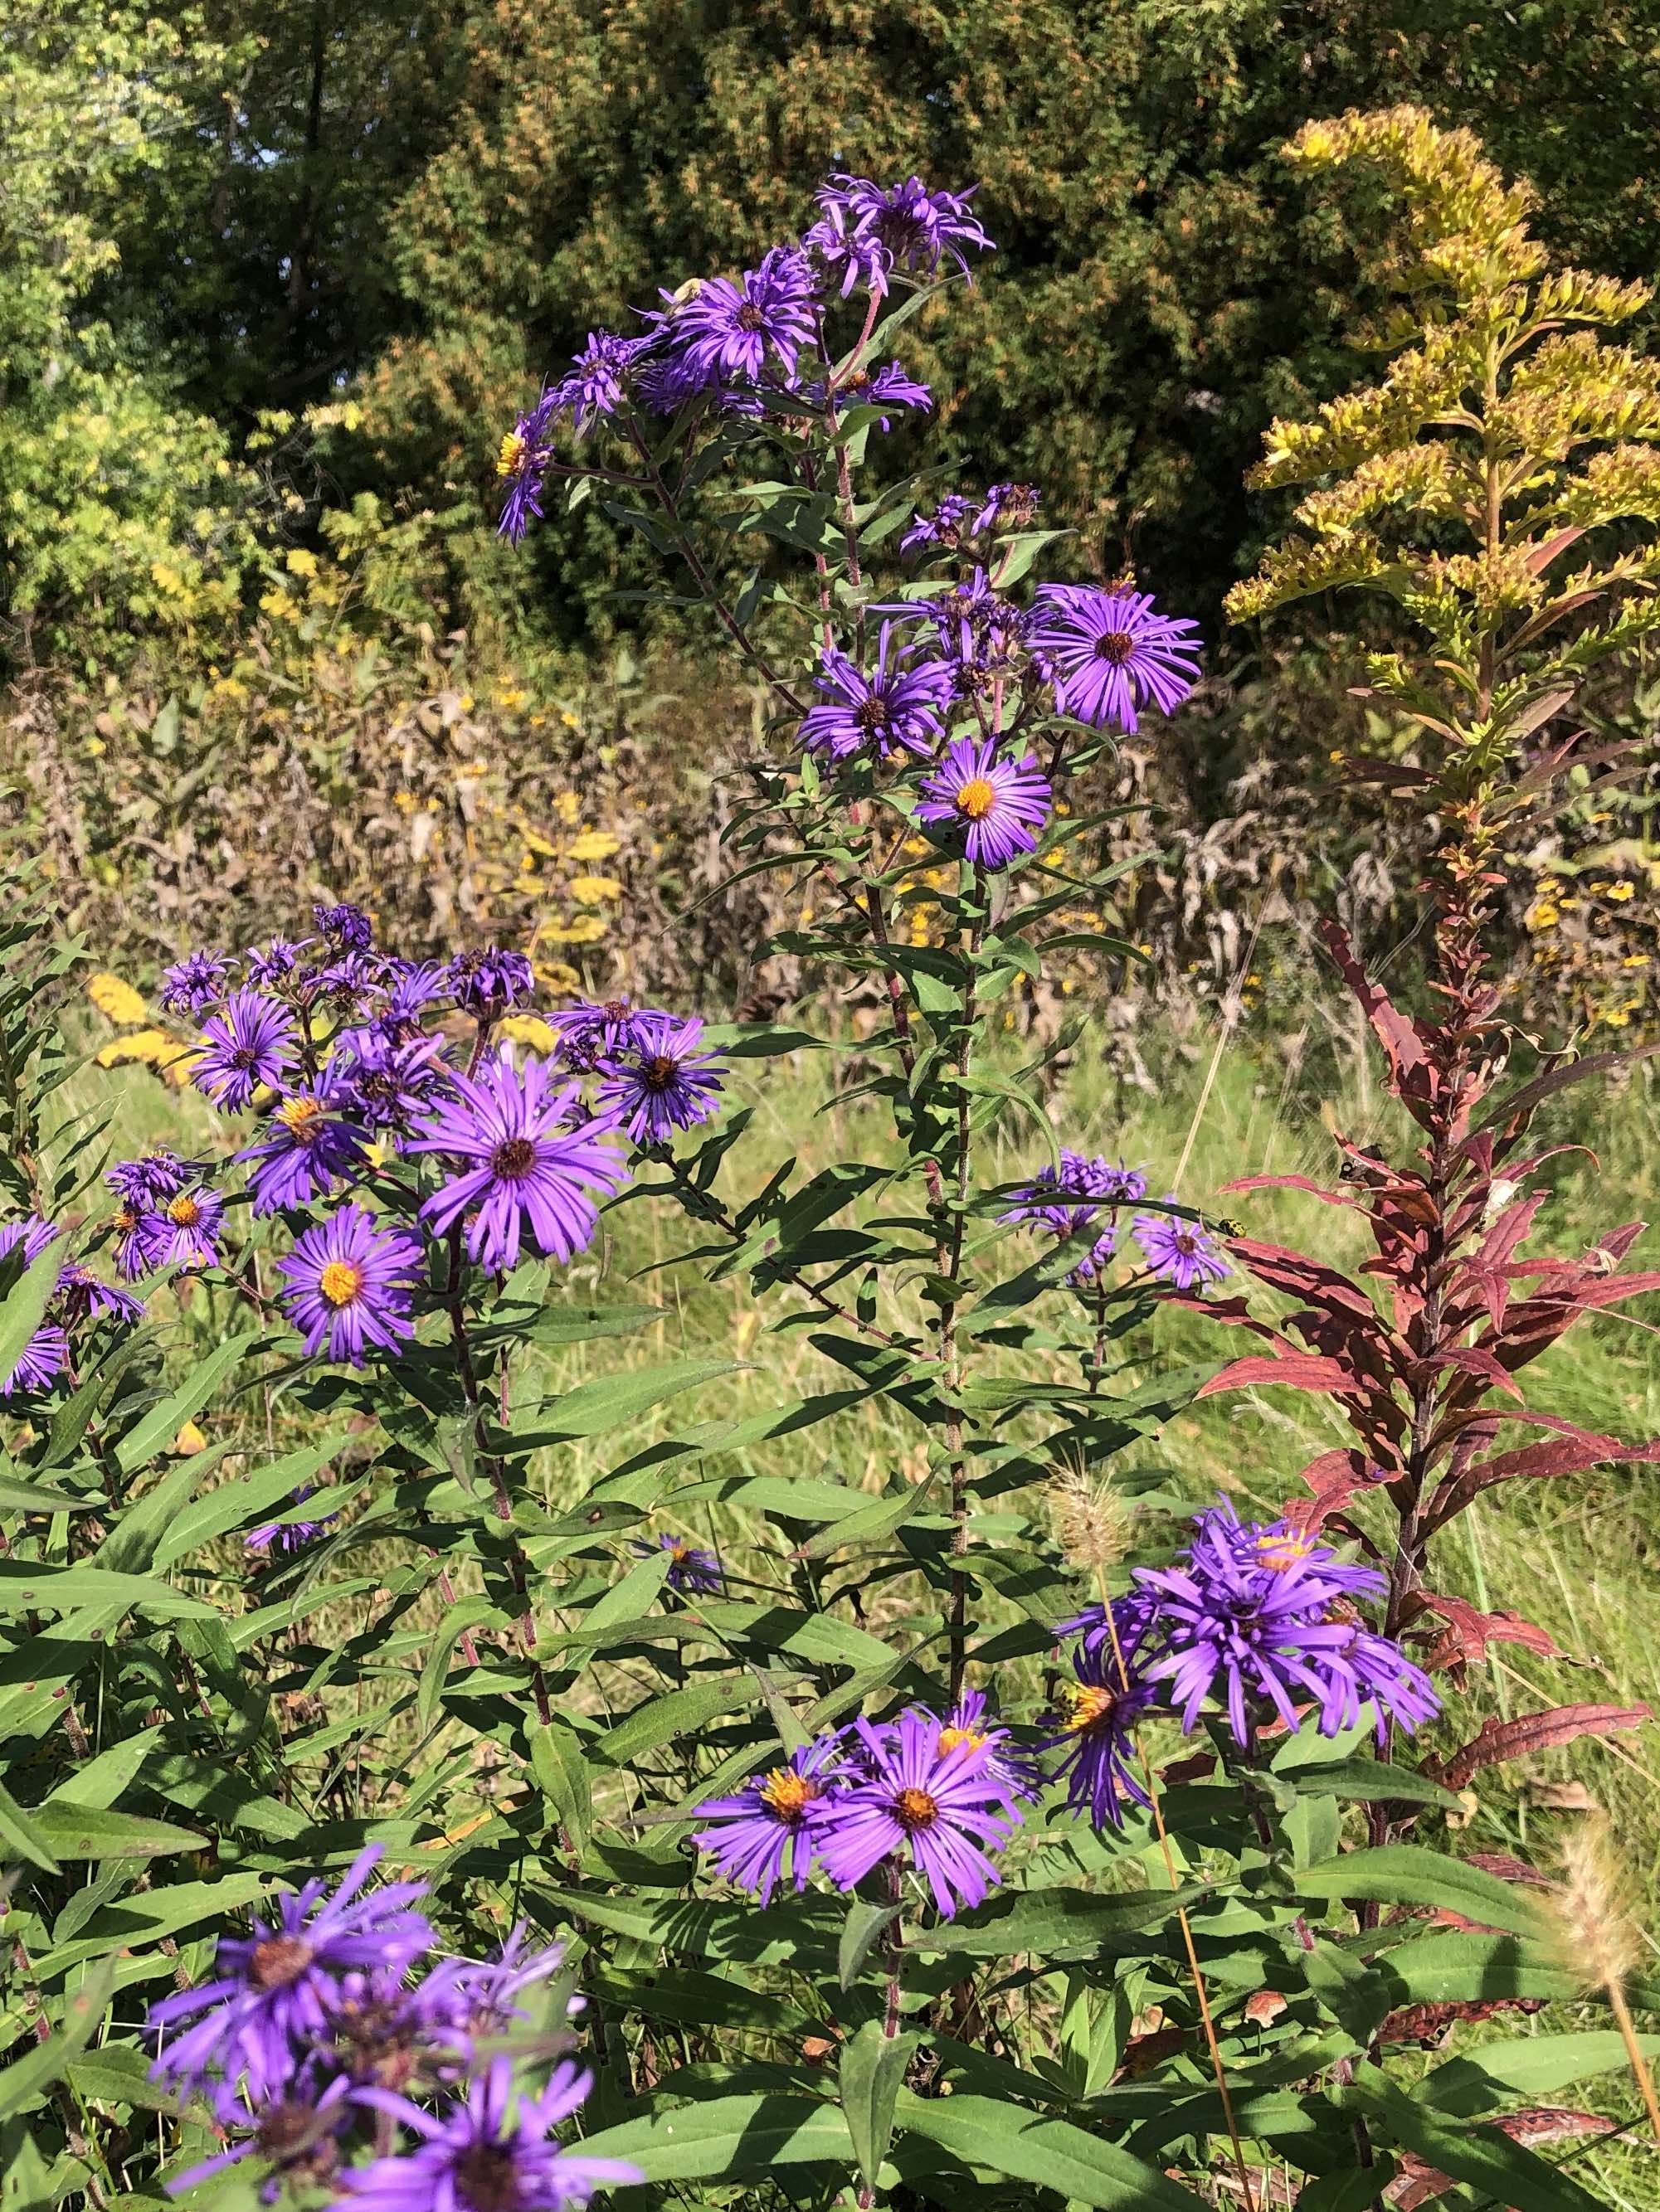 New England Aster along bike path between Midvales Blvd and Beltline in Madison, Wisconsin on October, 2022.